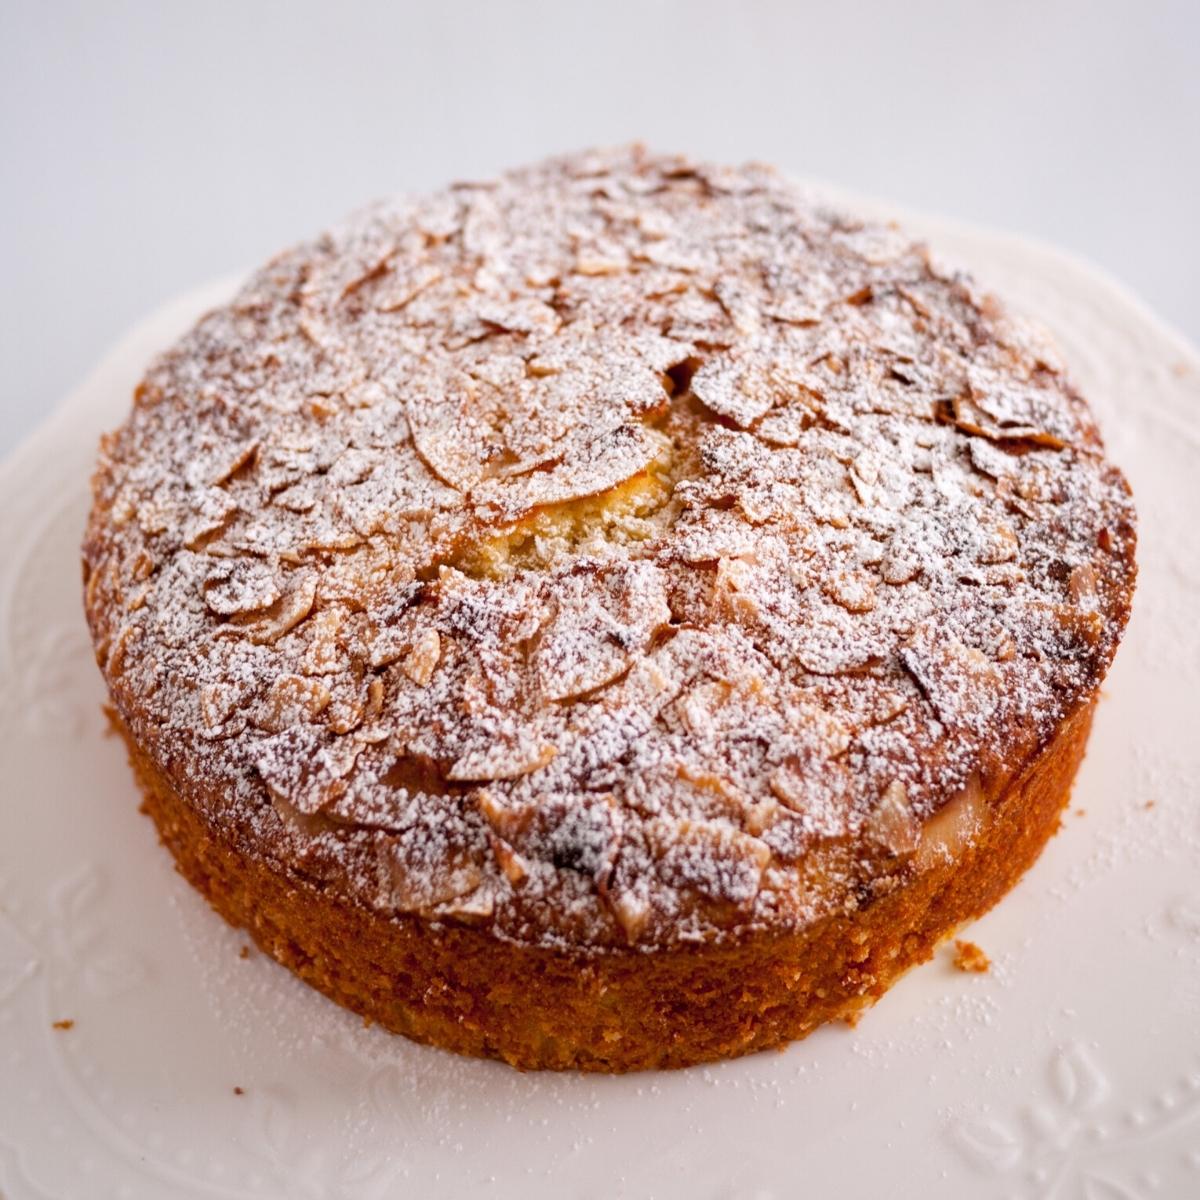 A coconut coffee cake dusted with powdered sugar.